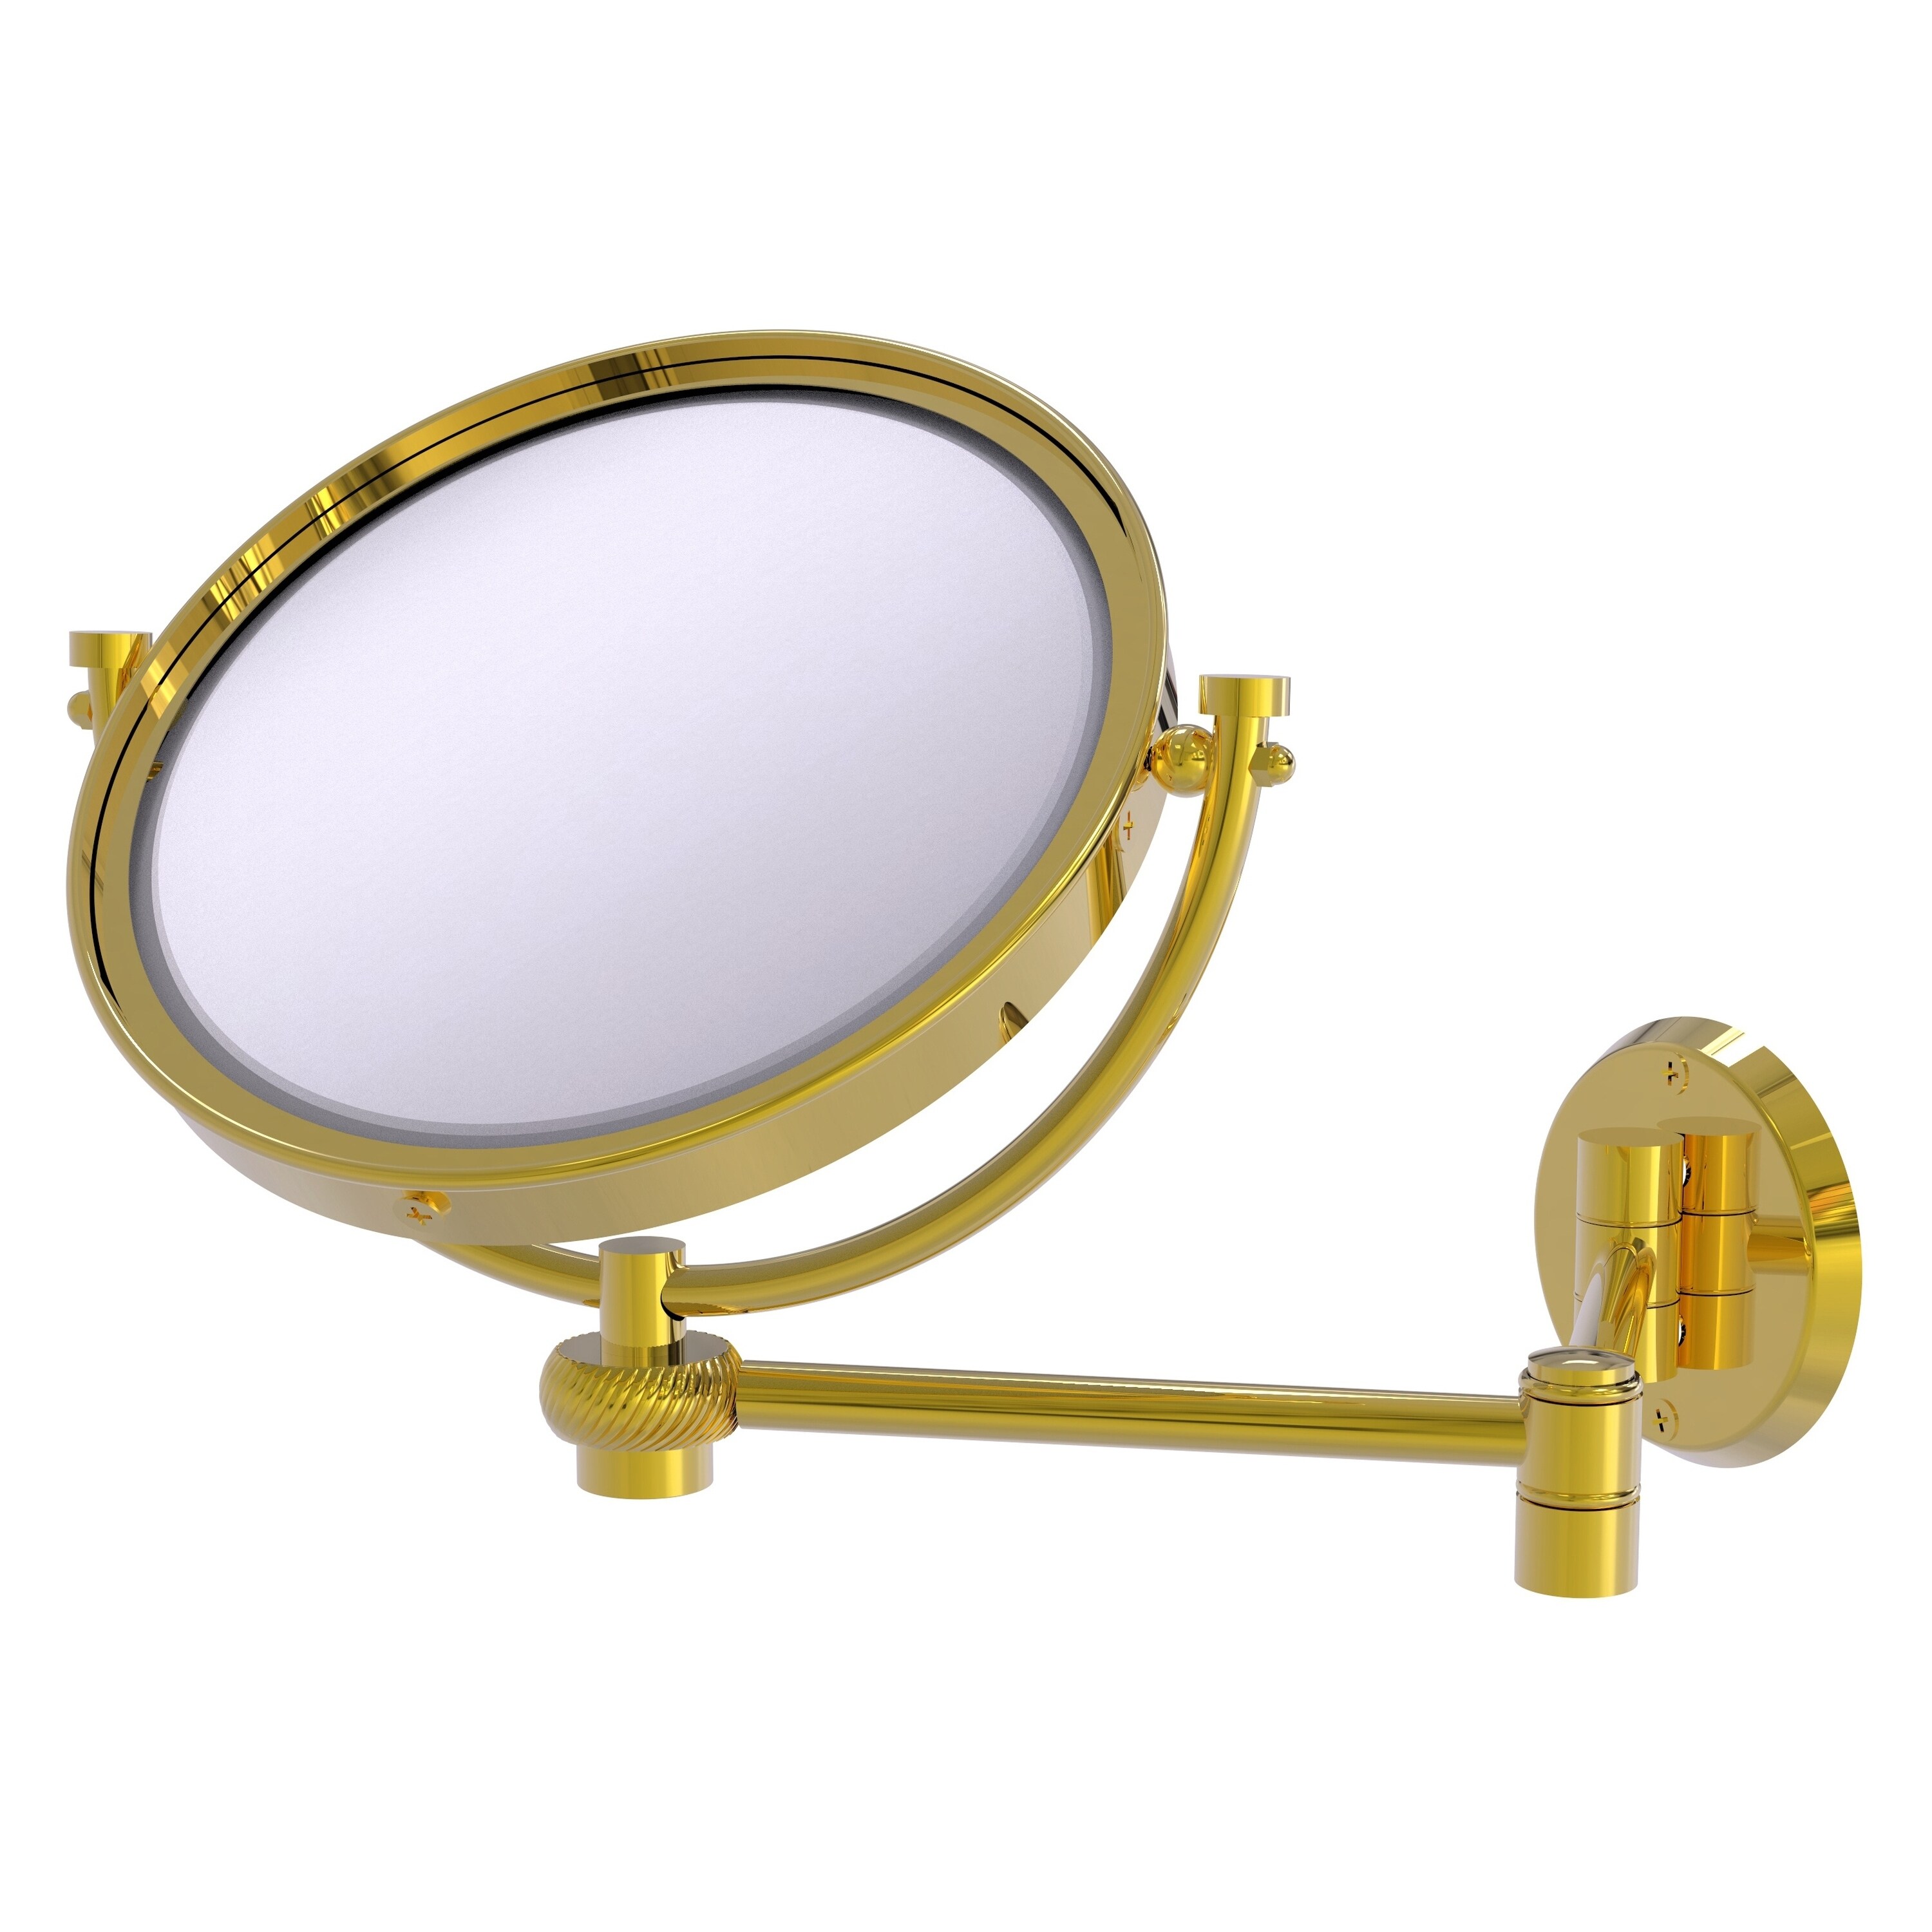 8-in x 10-in Polished Silver Double-sided 5X Magnifying Wall-mounted Vanity Mirror | - Allied Brass WM-6T/5X-PB